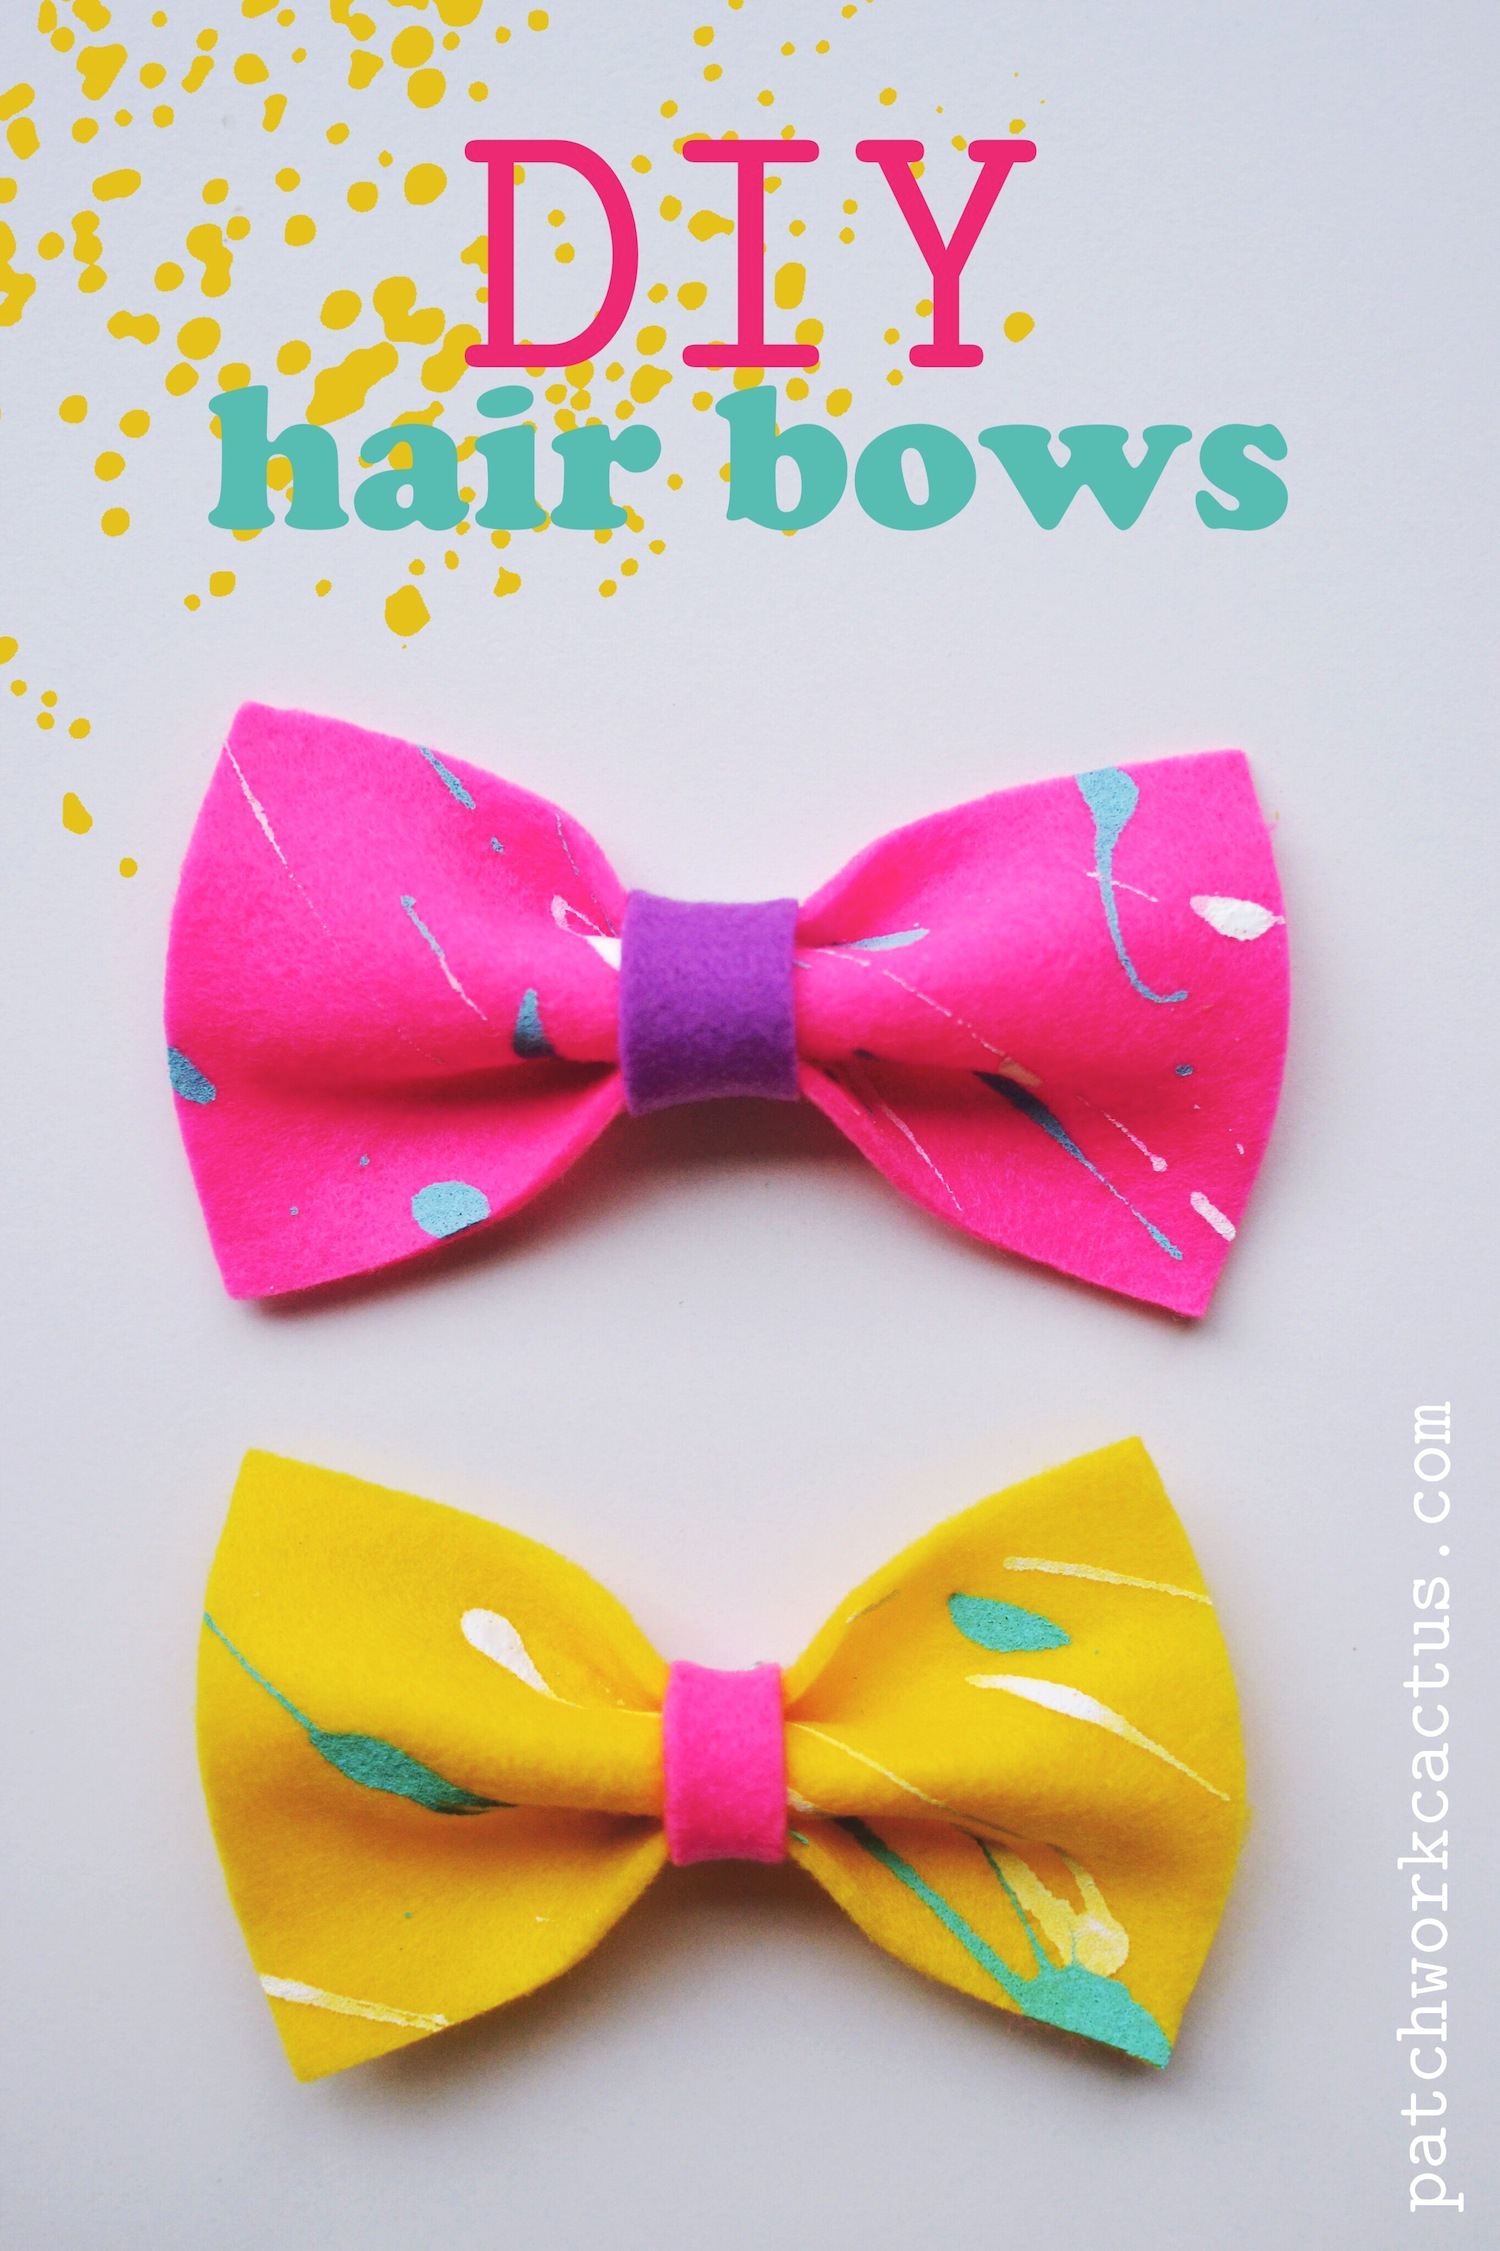 These paint splattered DIY felt hair bows are super cute and perfect for a party favour.